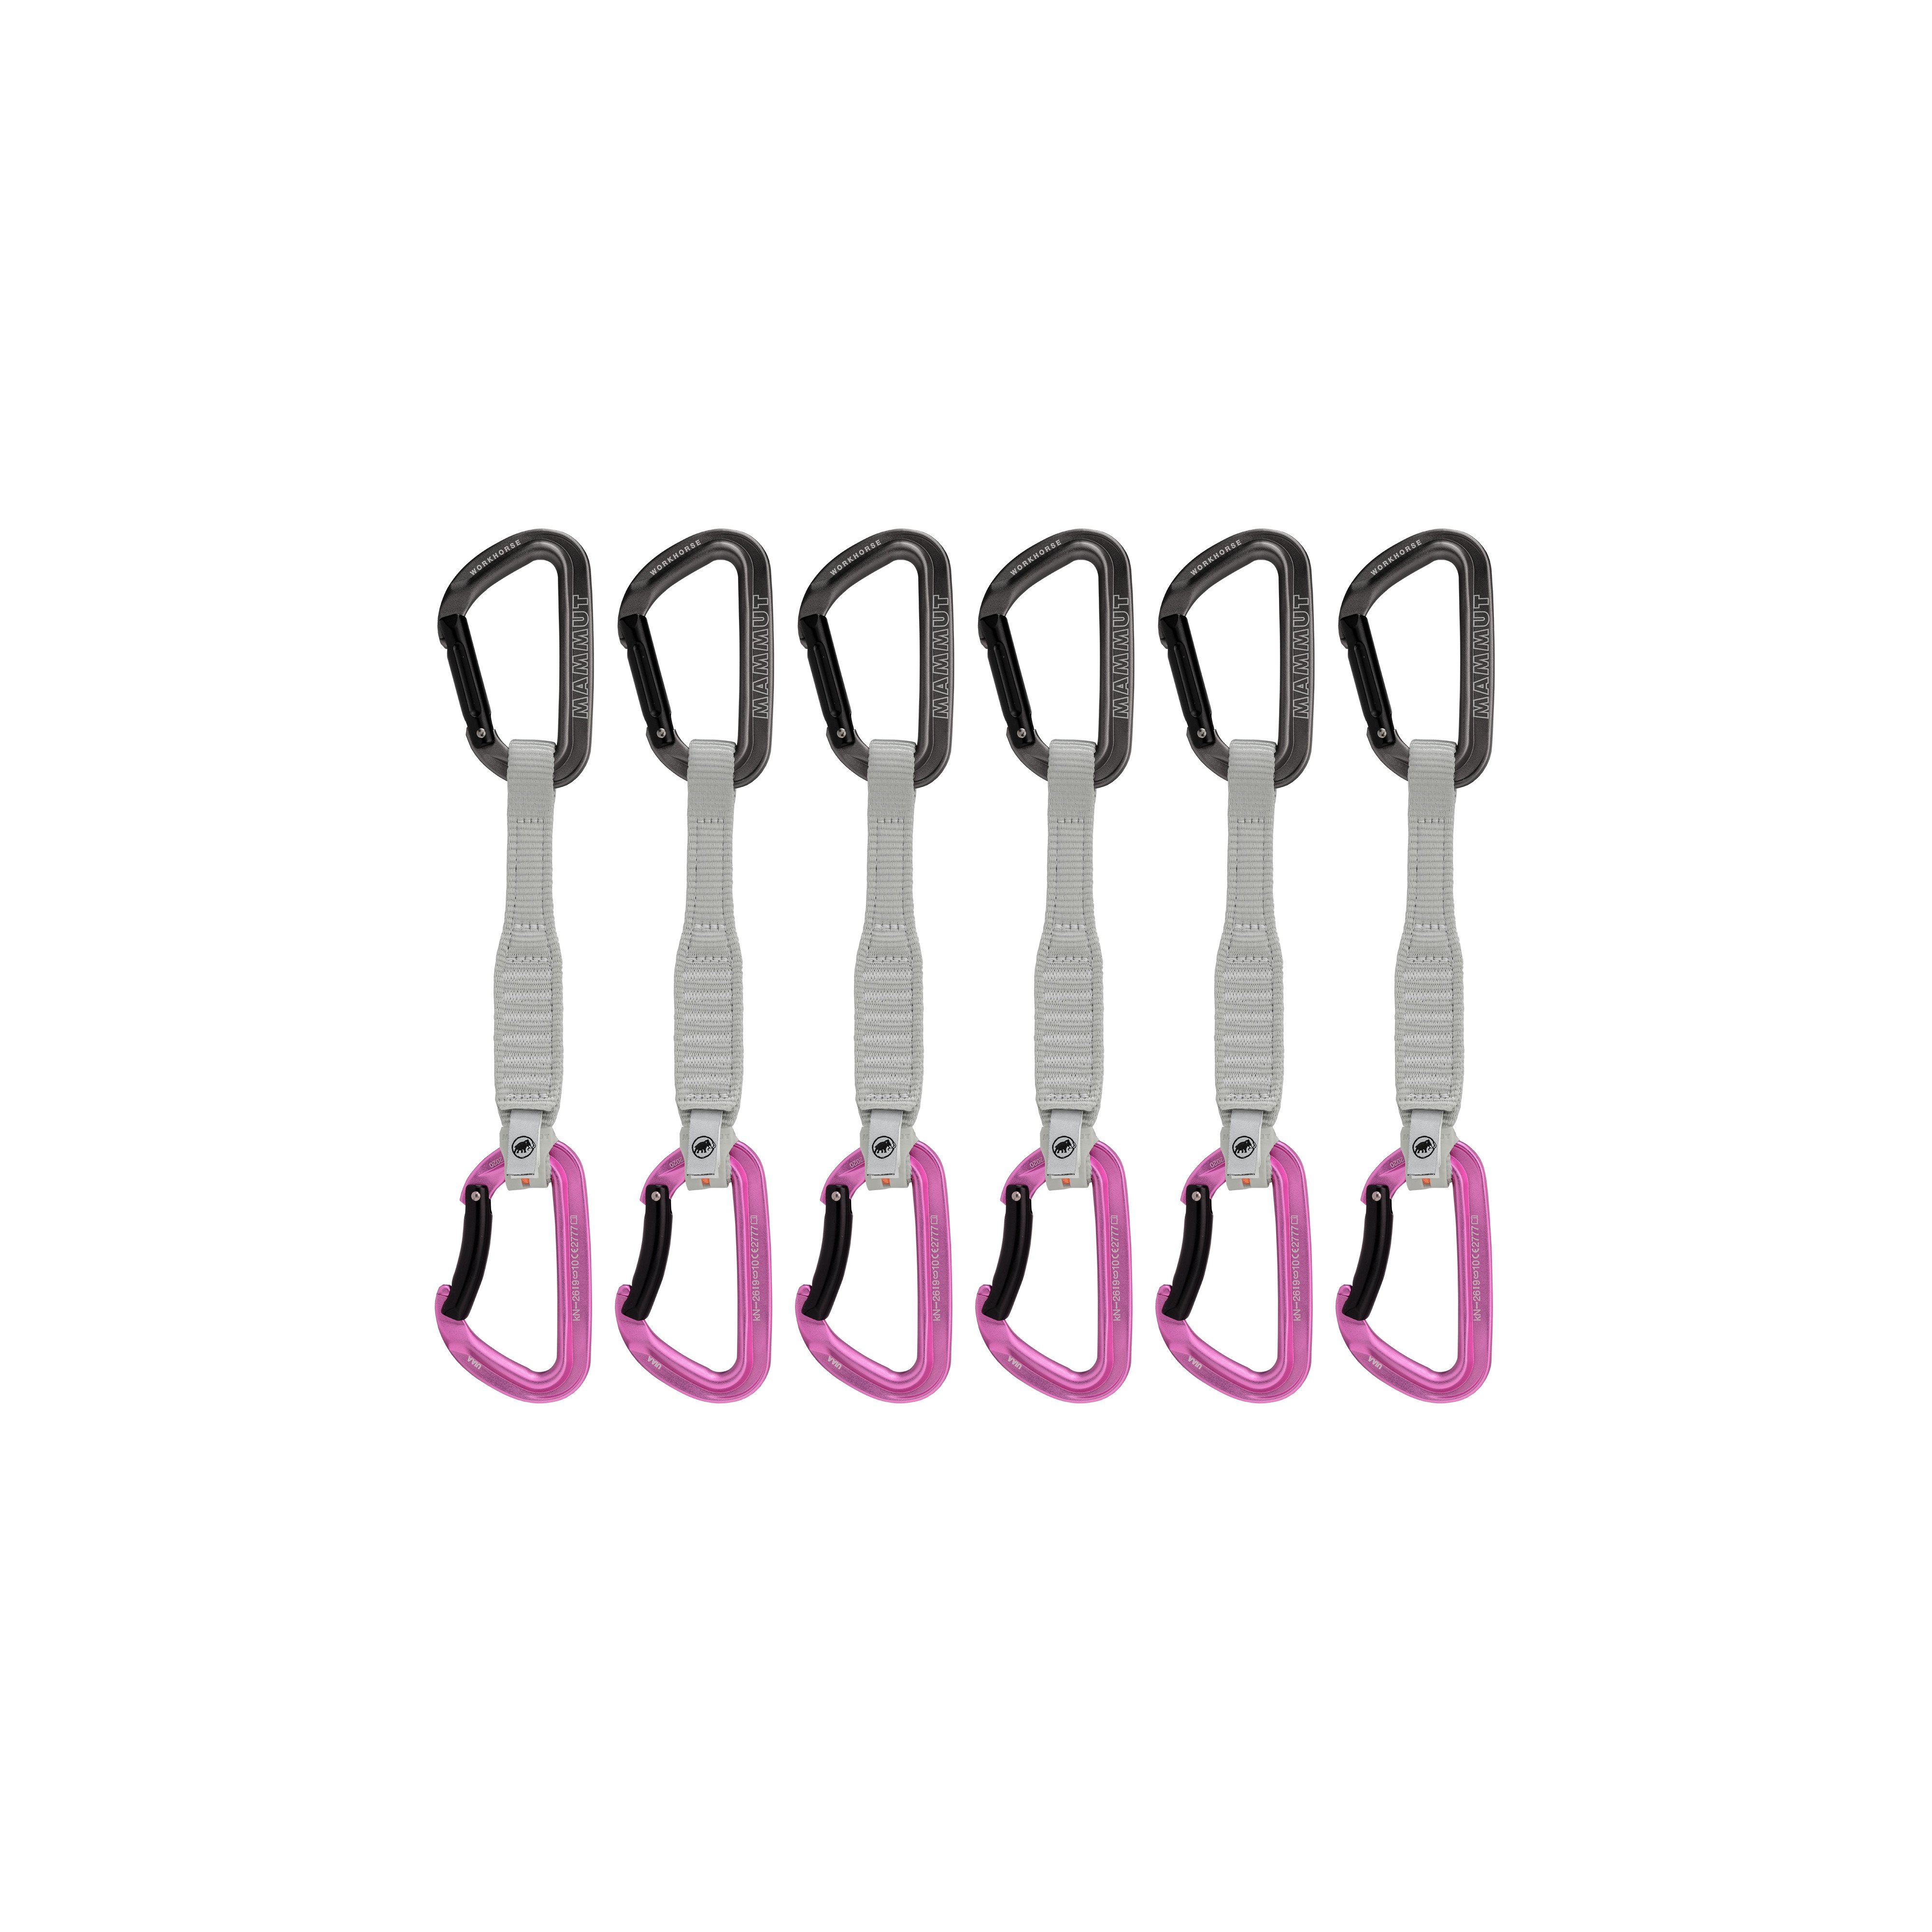 Workhorse Keylock 17 cm 6-Pack Quickdraws - grey-pink, 17 cm product image